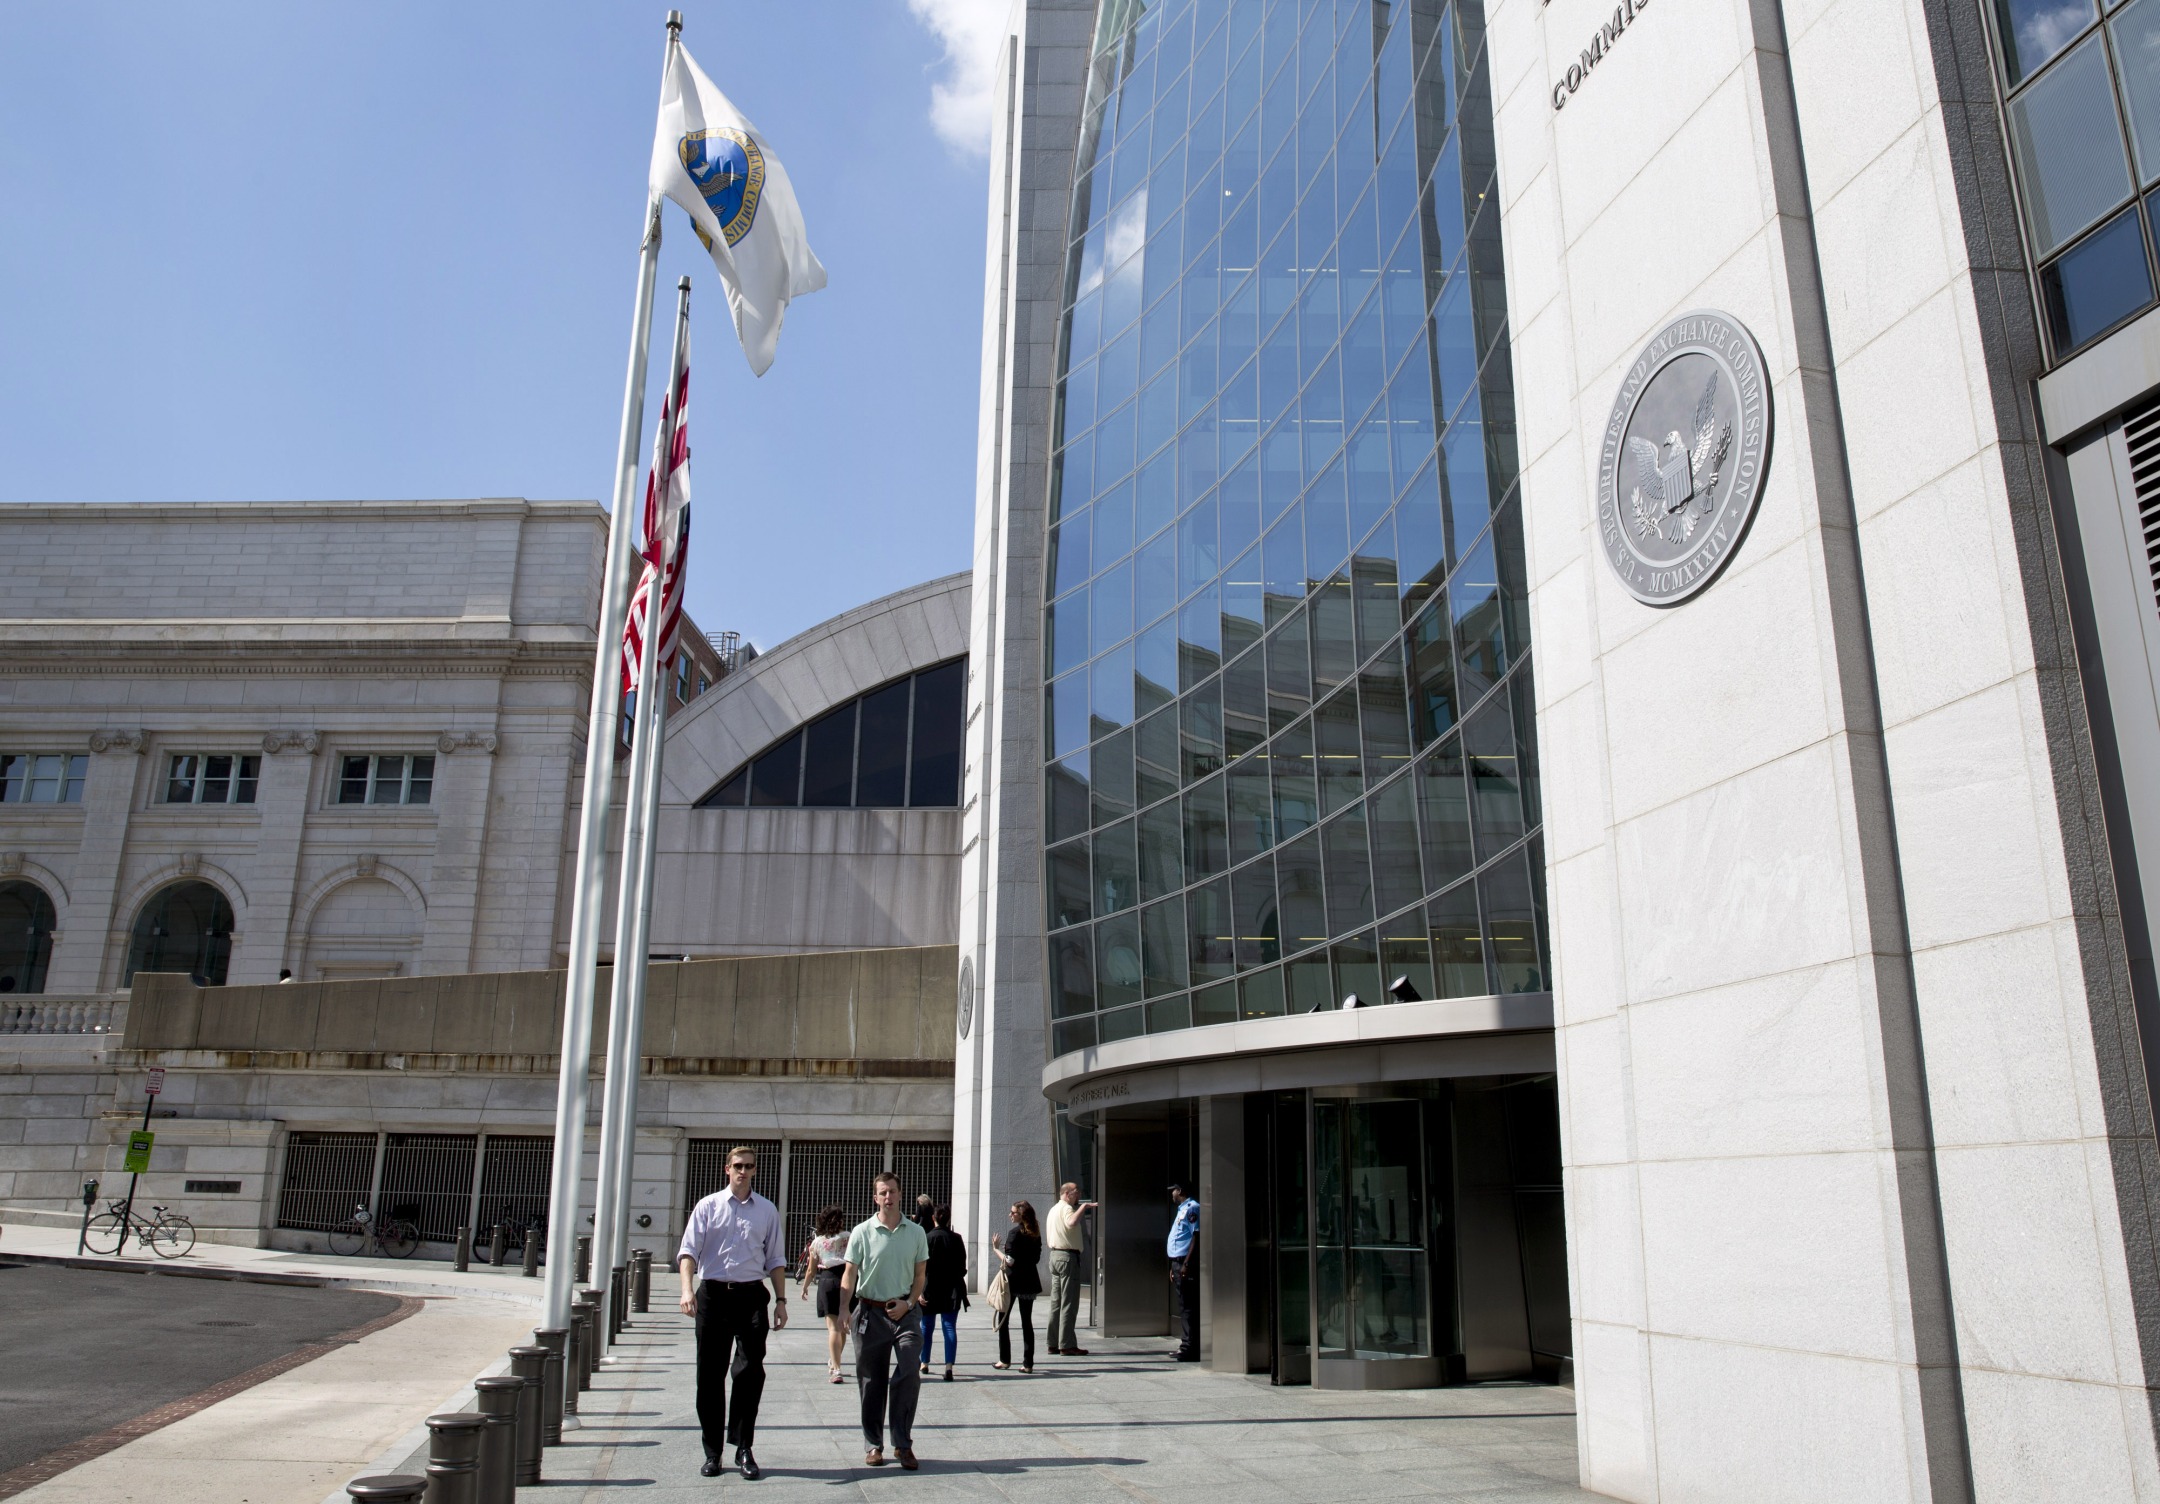 The Securities and Exchange Commission headquarters in Washington, D.C.